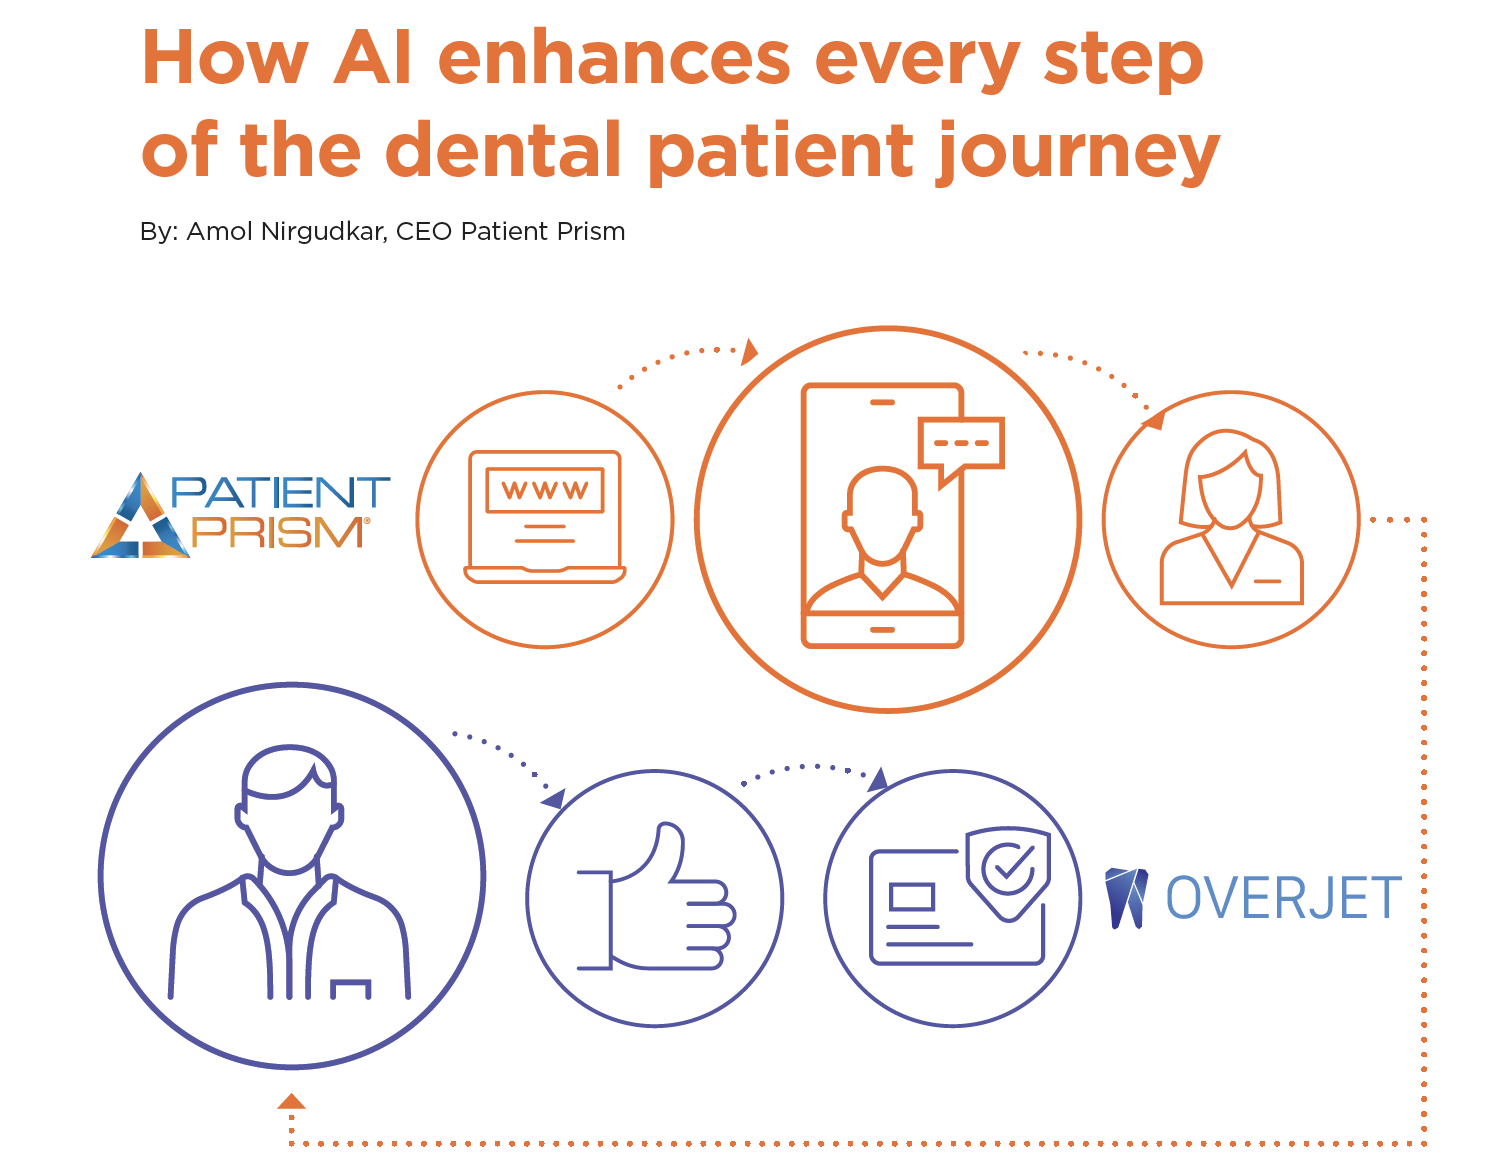 How AI enhances every step of the dental patient journey